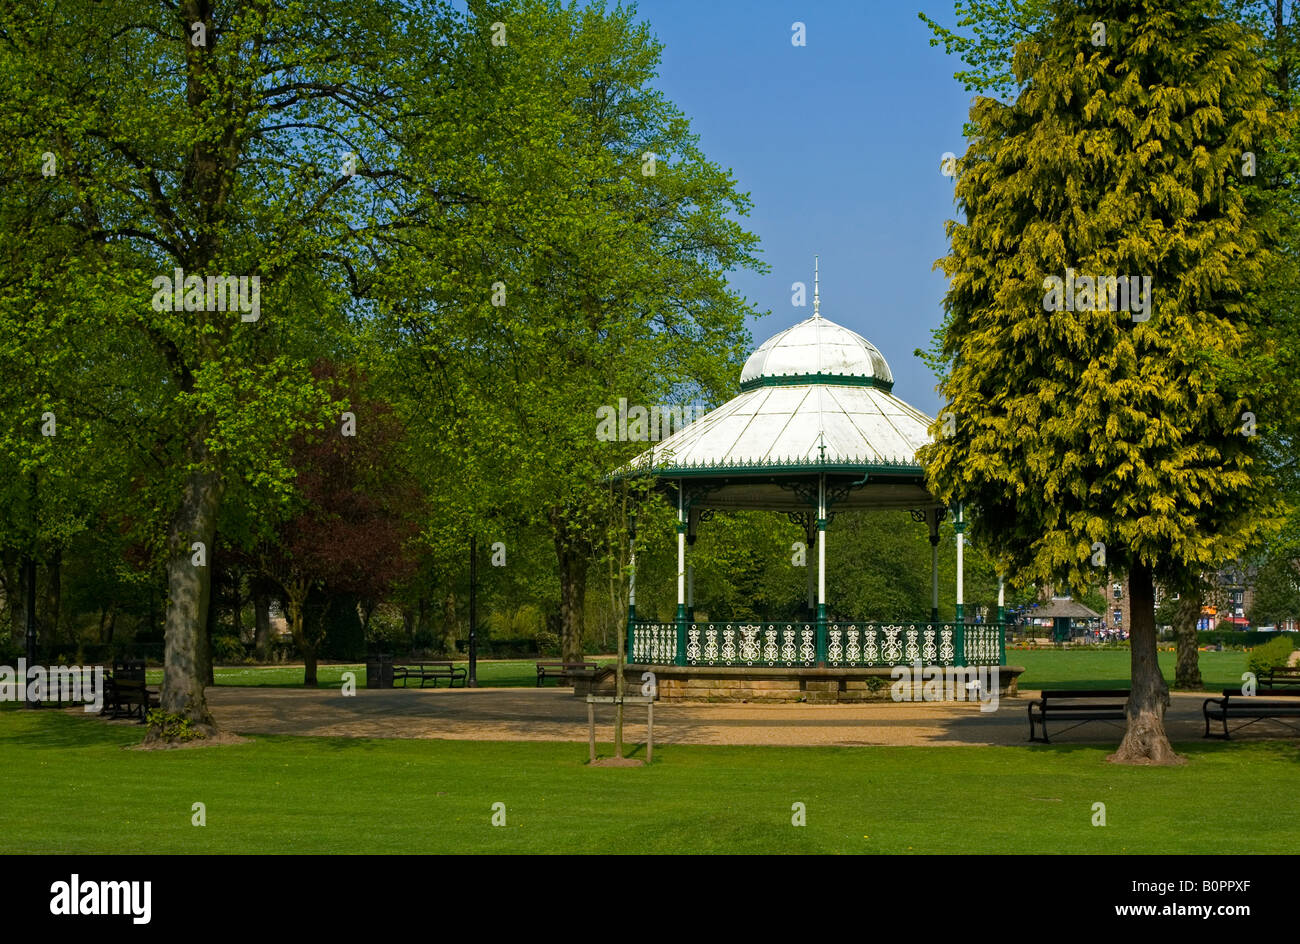 View of the bandstand in Hall Leys Park Matlock Derbyshire Peak District England UK Stock Photo